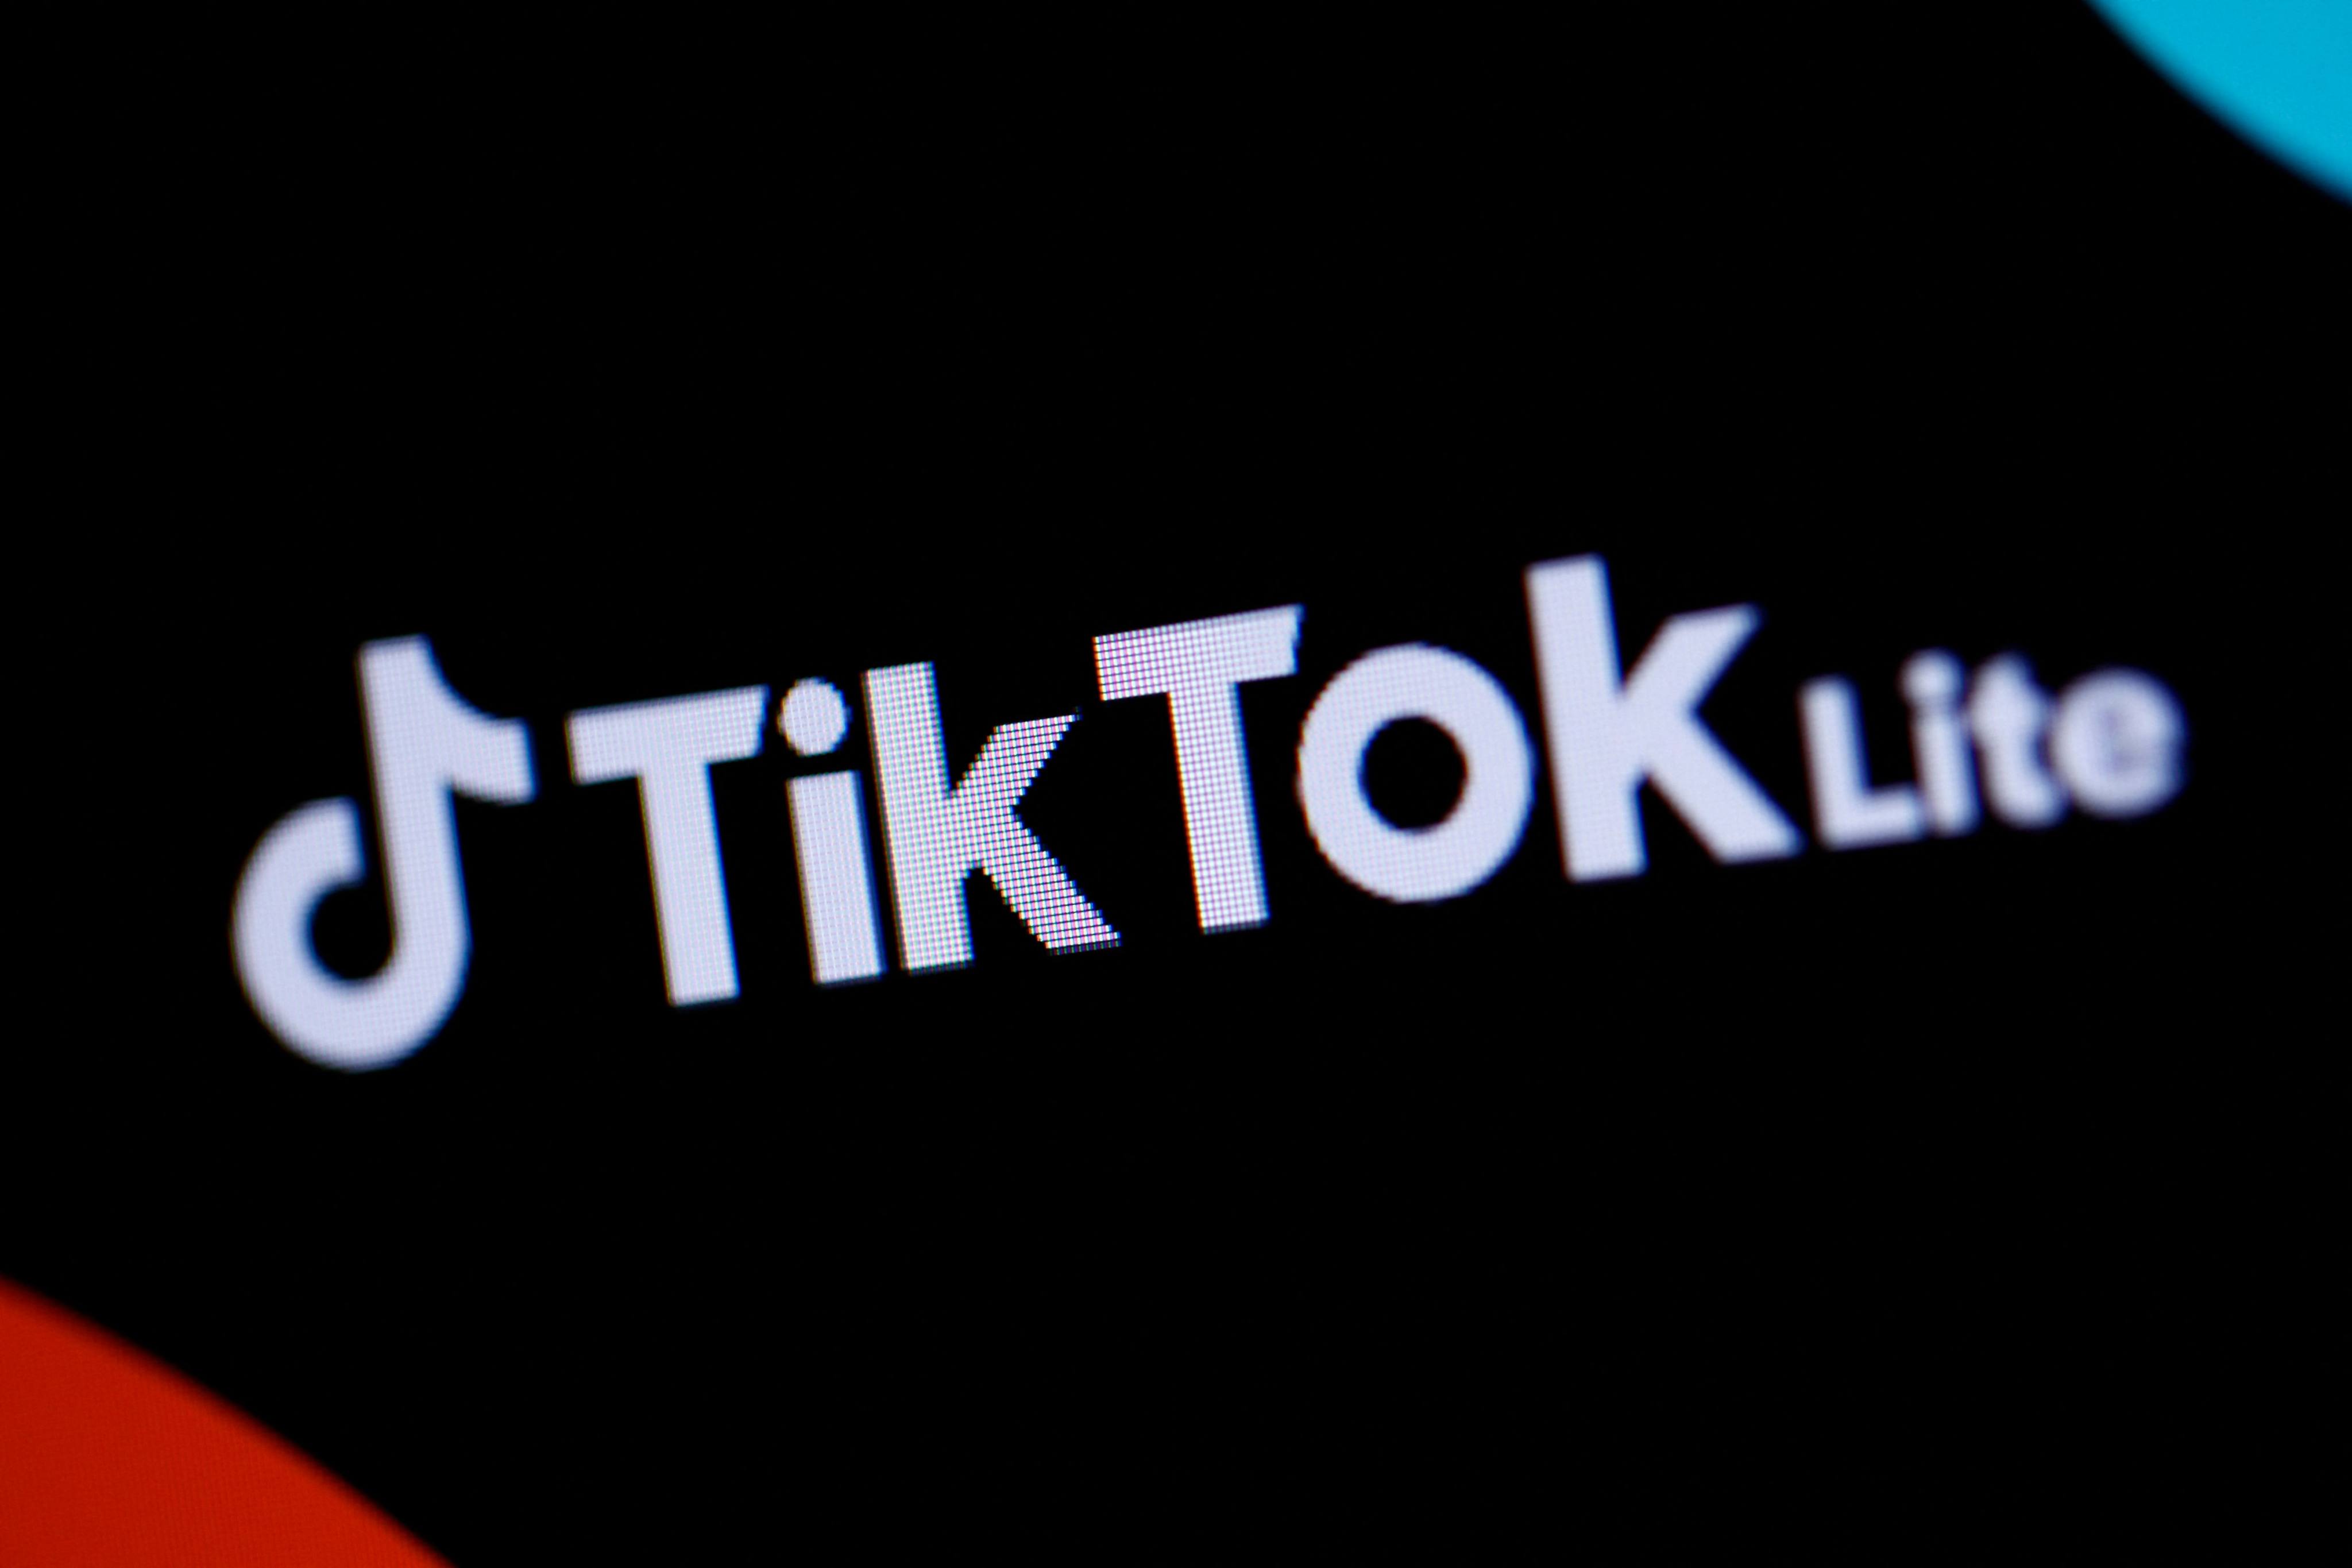 Logo of the Chinese social network application TikTok Lite. TikTok Lite is a smaller version of the popular TikTok app, taking up less memory in a smartphone and made to perform over slower internet connections. Photo: AFP